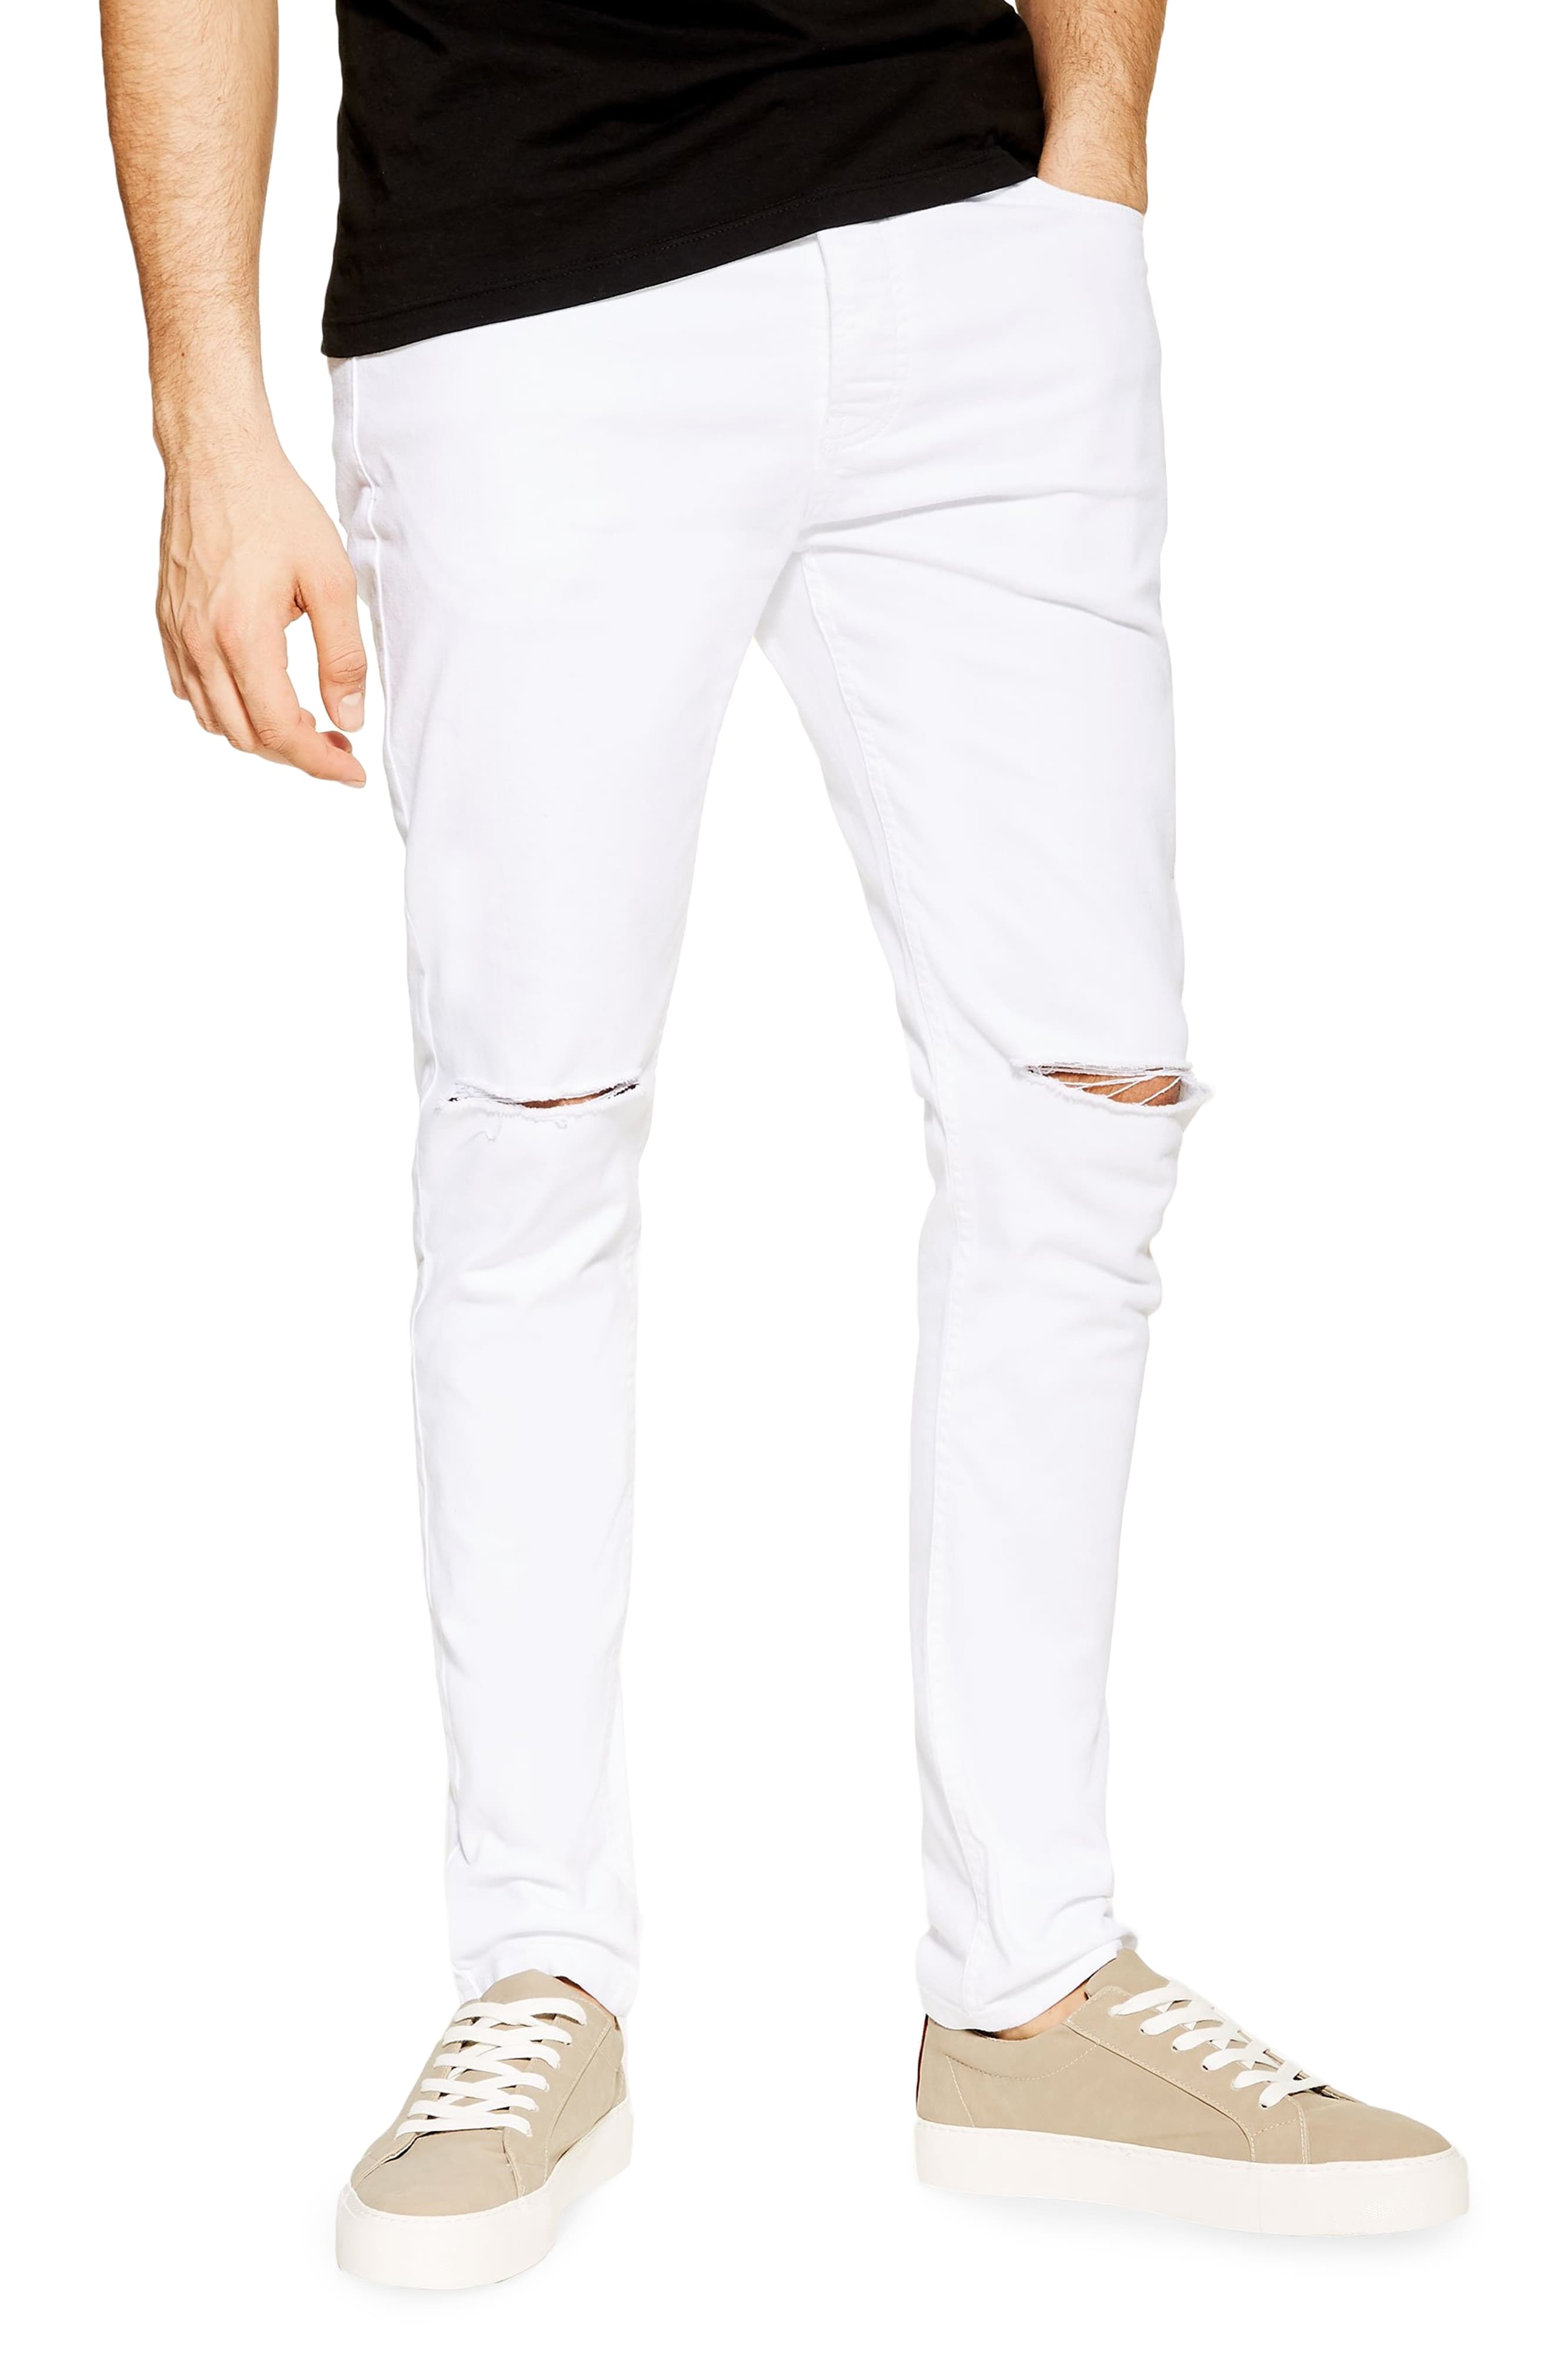 Men S Topman Ripped Stretch Skinny Fit Jeans Size 36 X 34 White